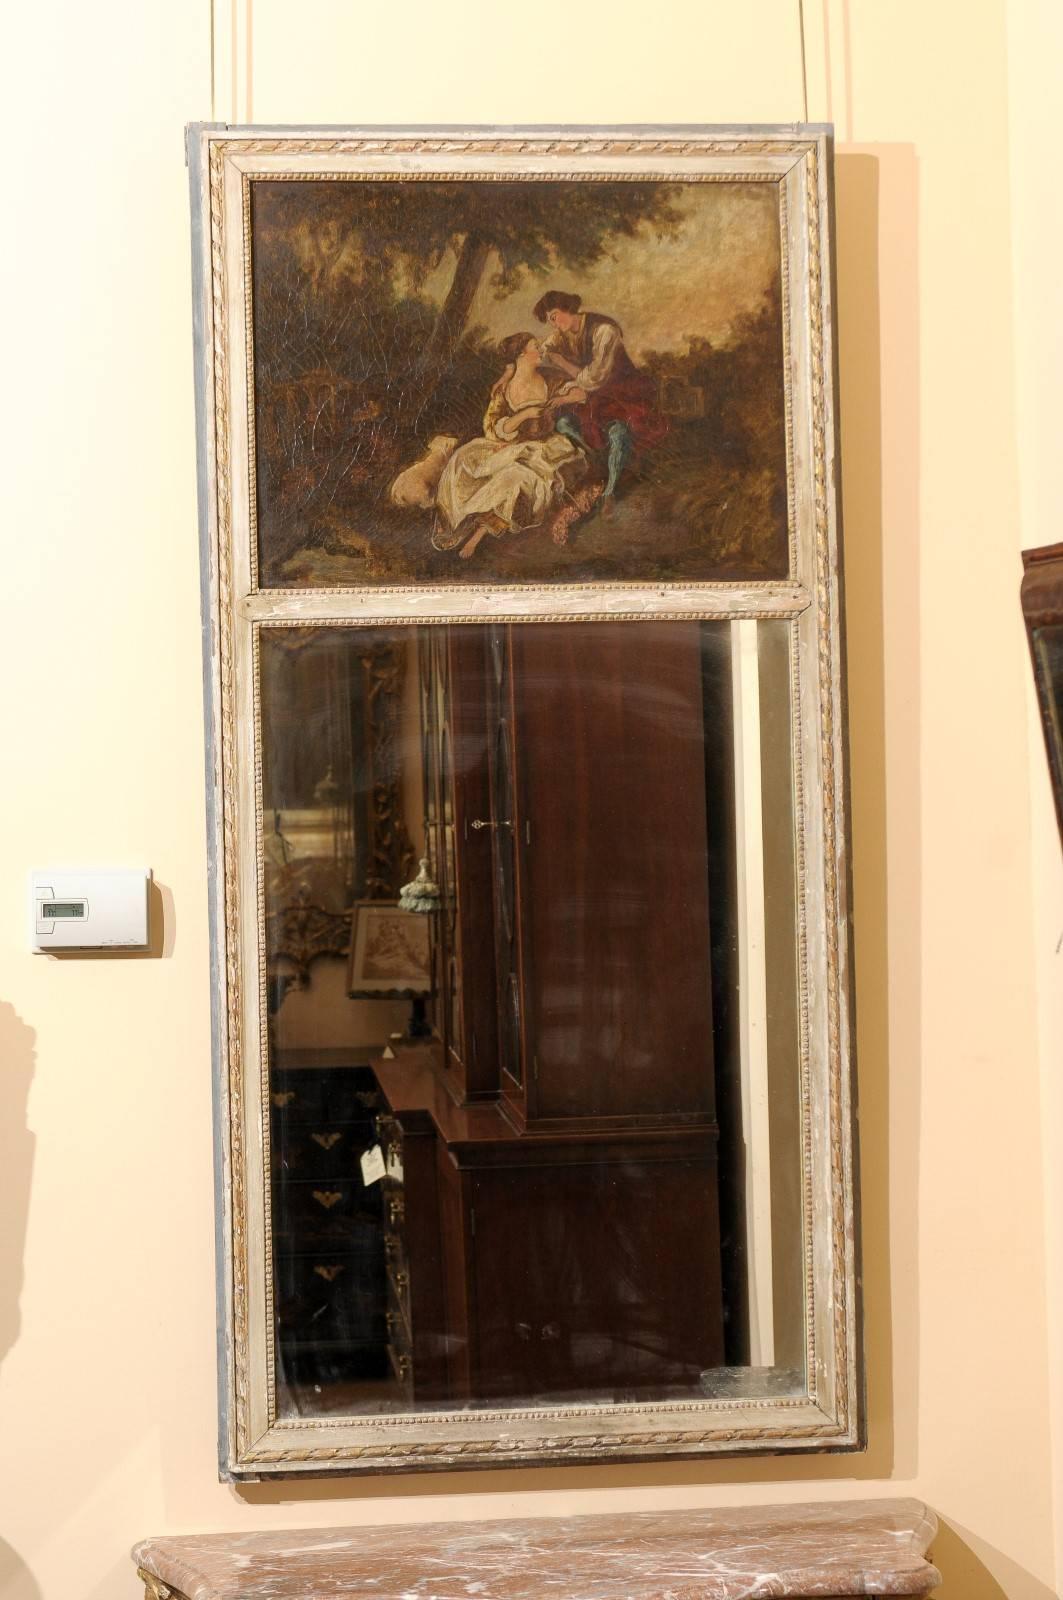 Early 19th century French trumeau mirror with oil on canvas painting.